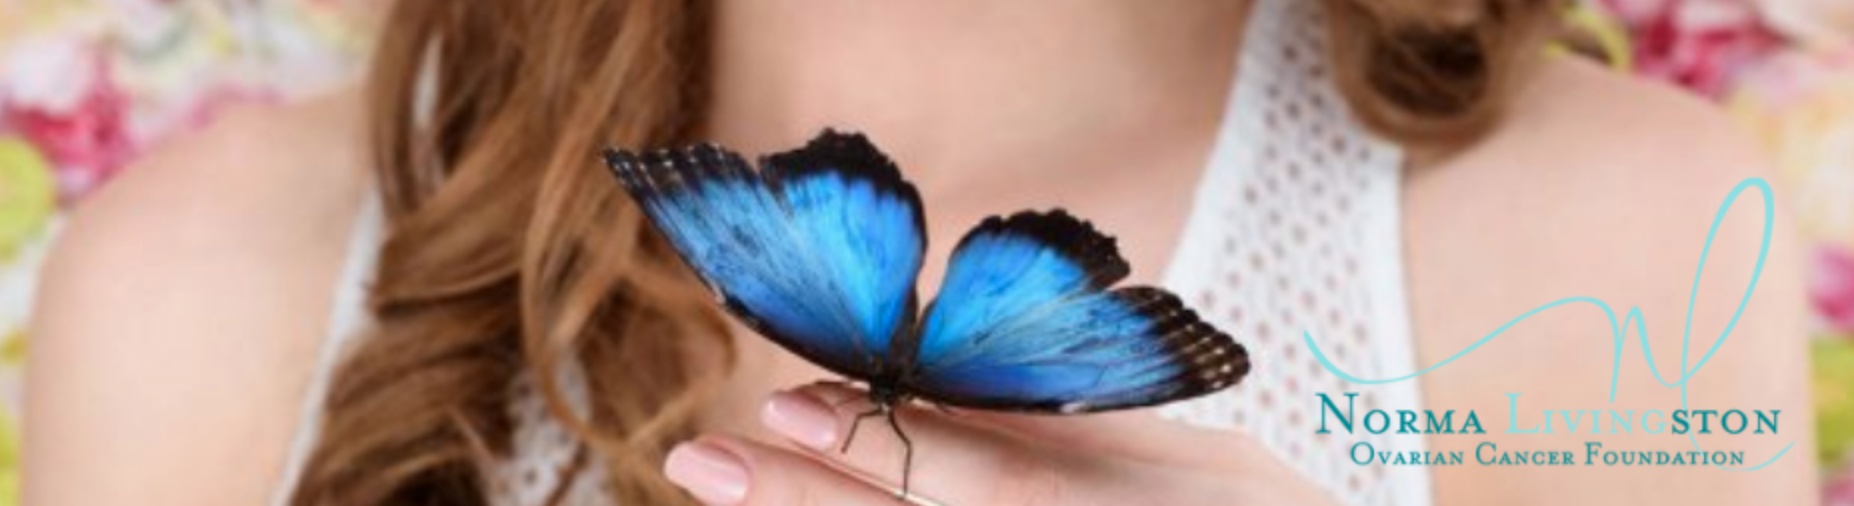 Together in Teal Butterfly Release planned for this Sunday